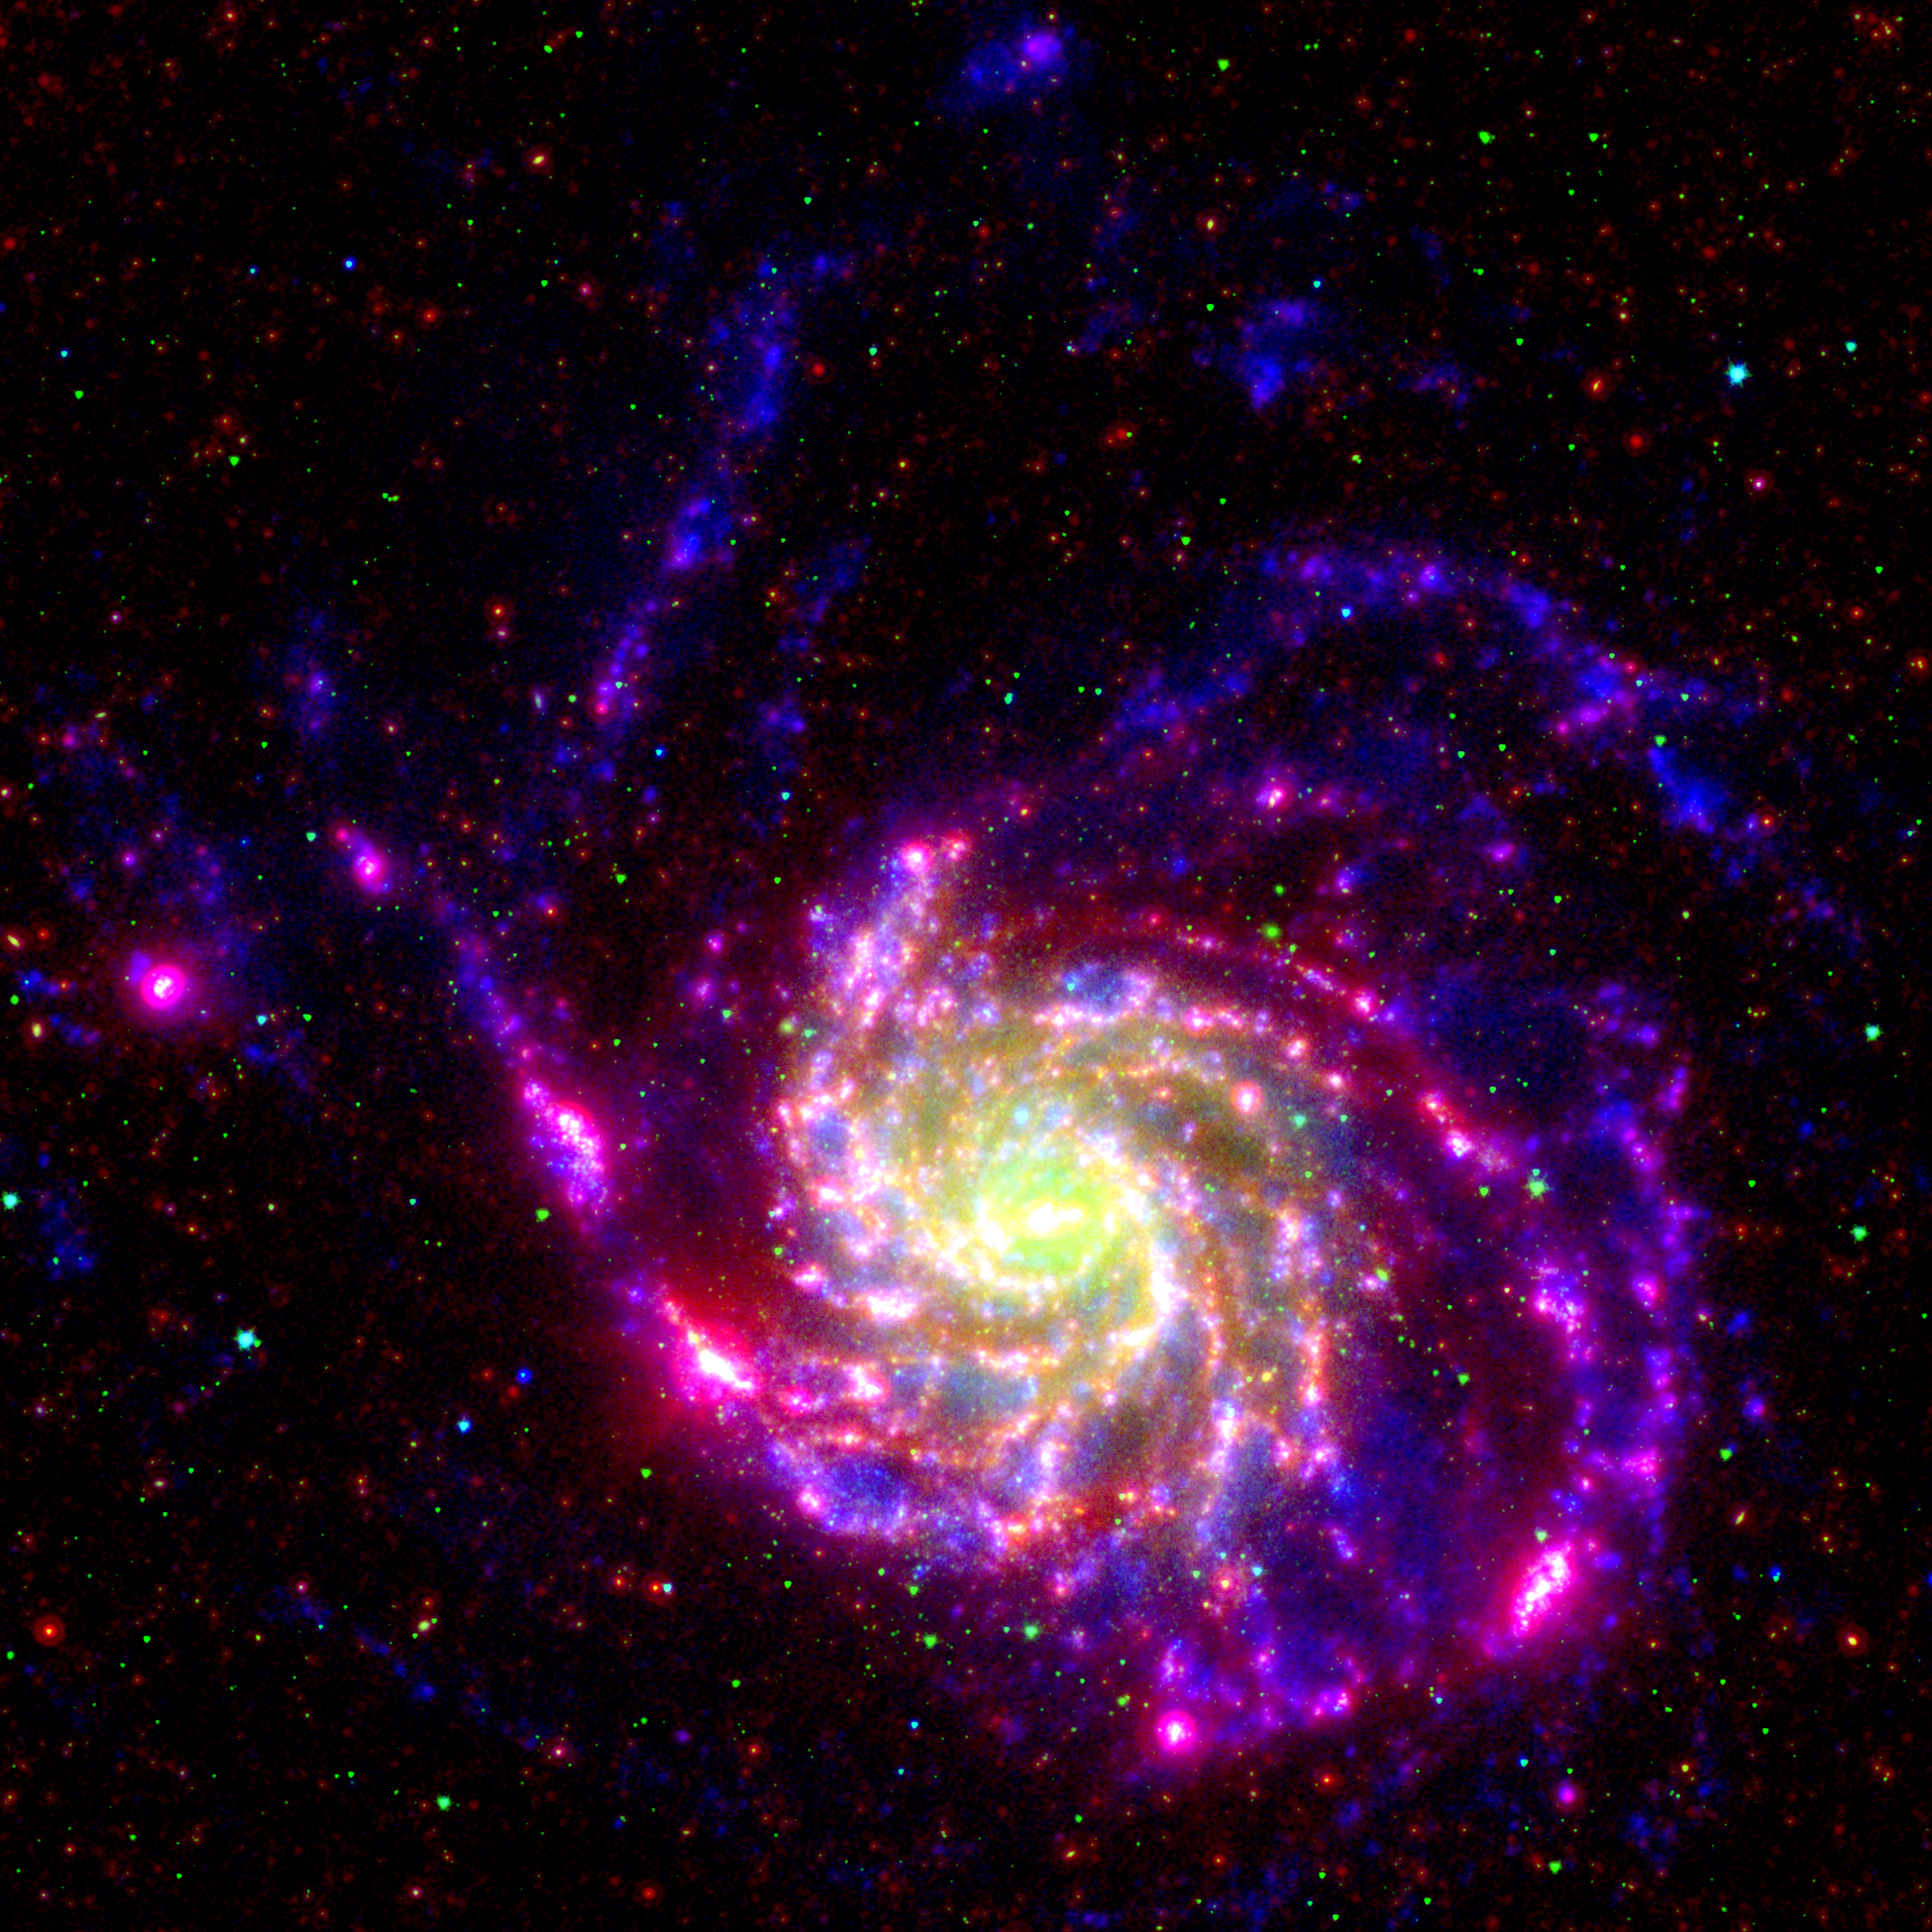 M101 (NGC 5457) as seen in ultraviolet and infrared emission